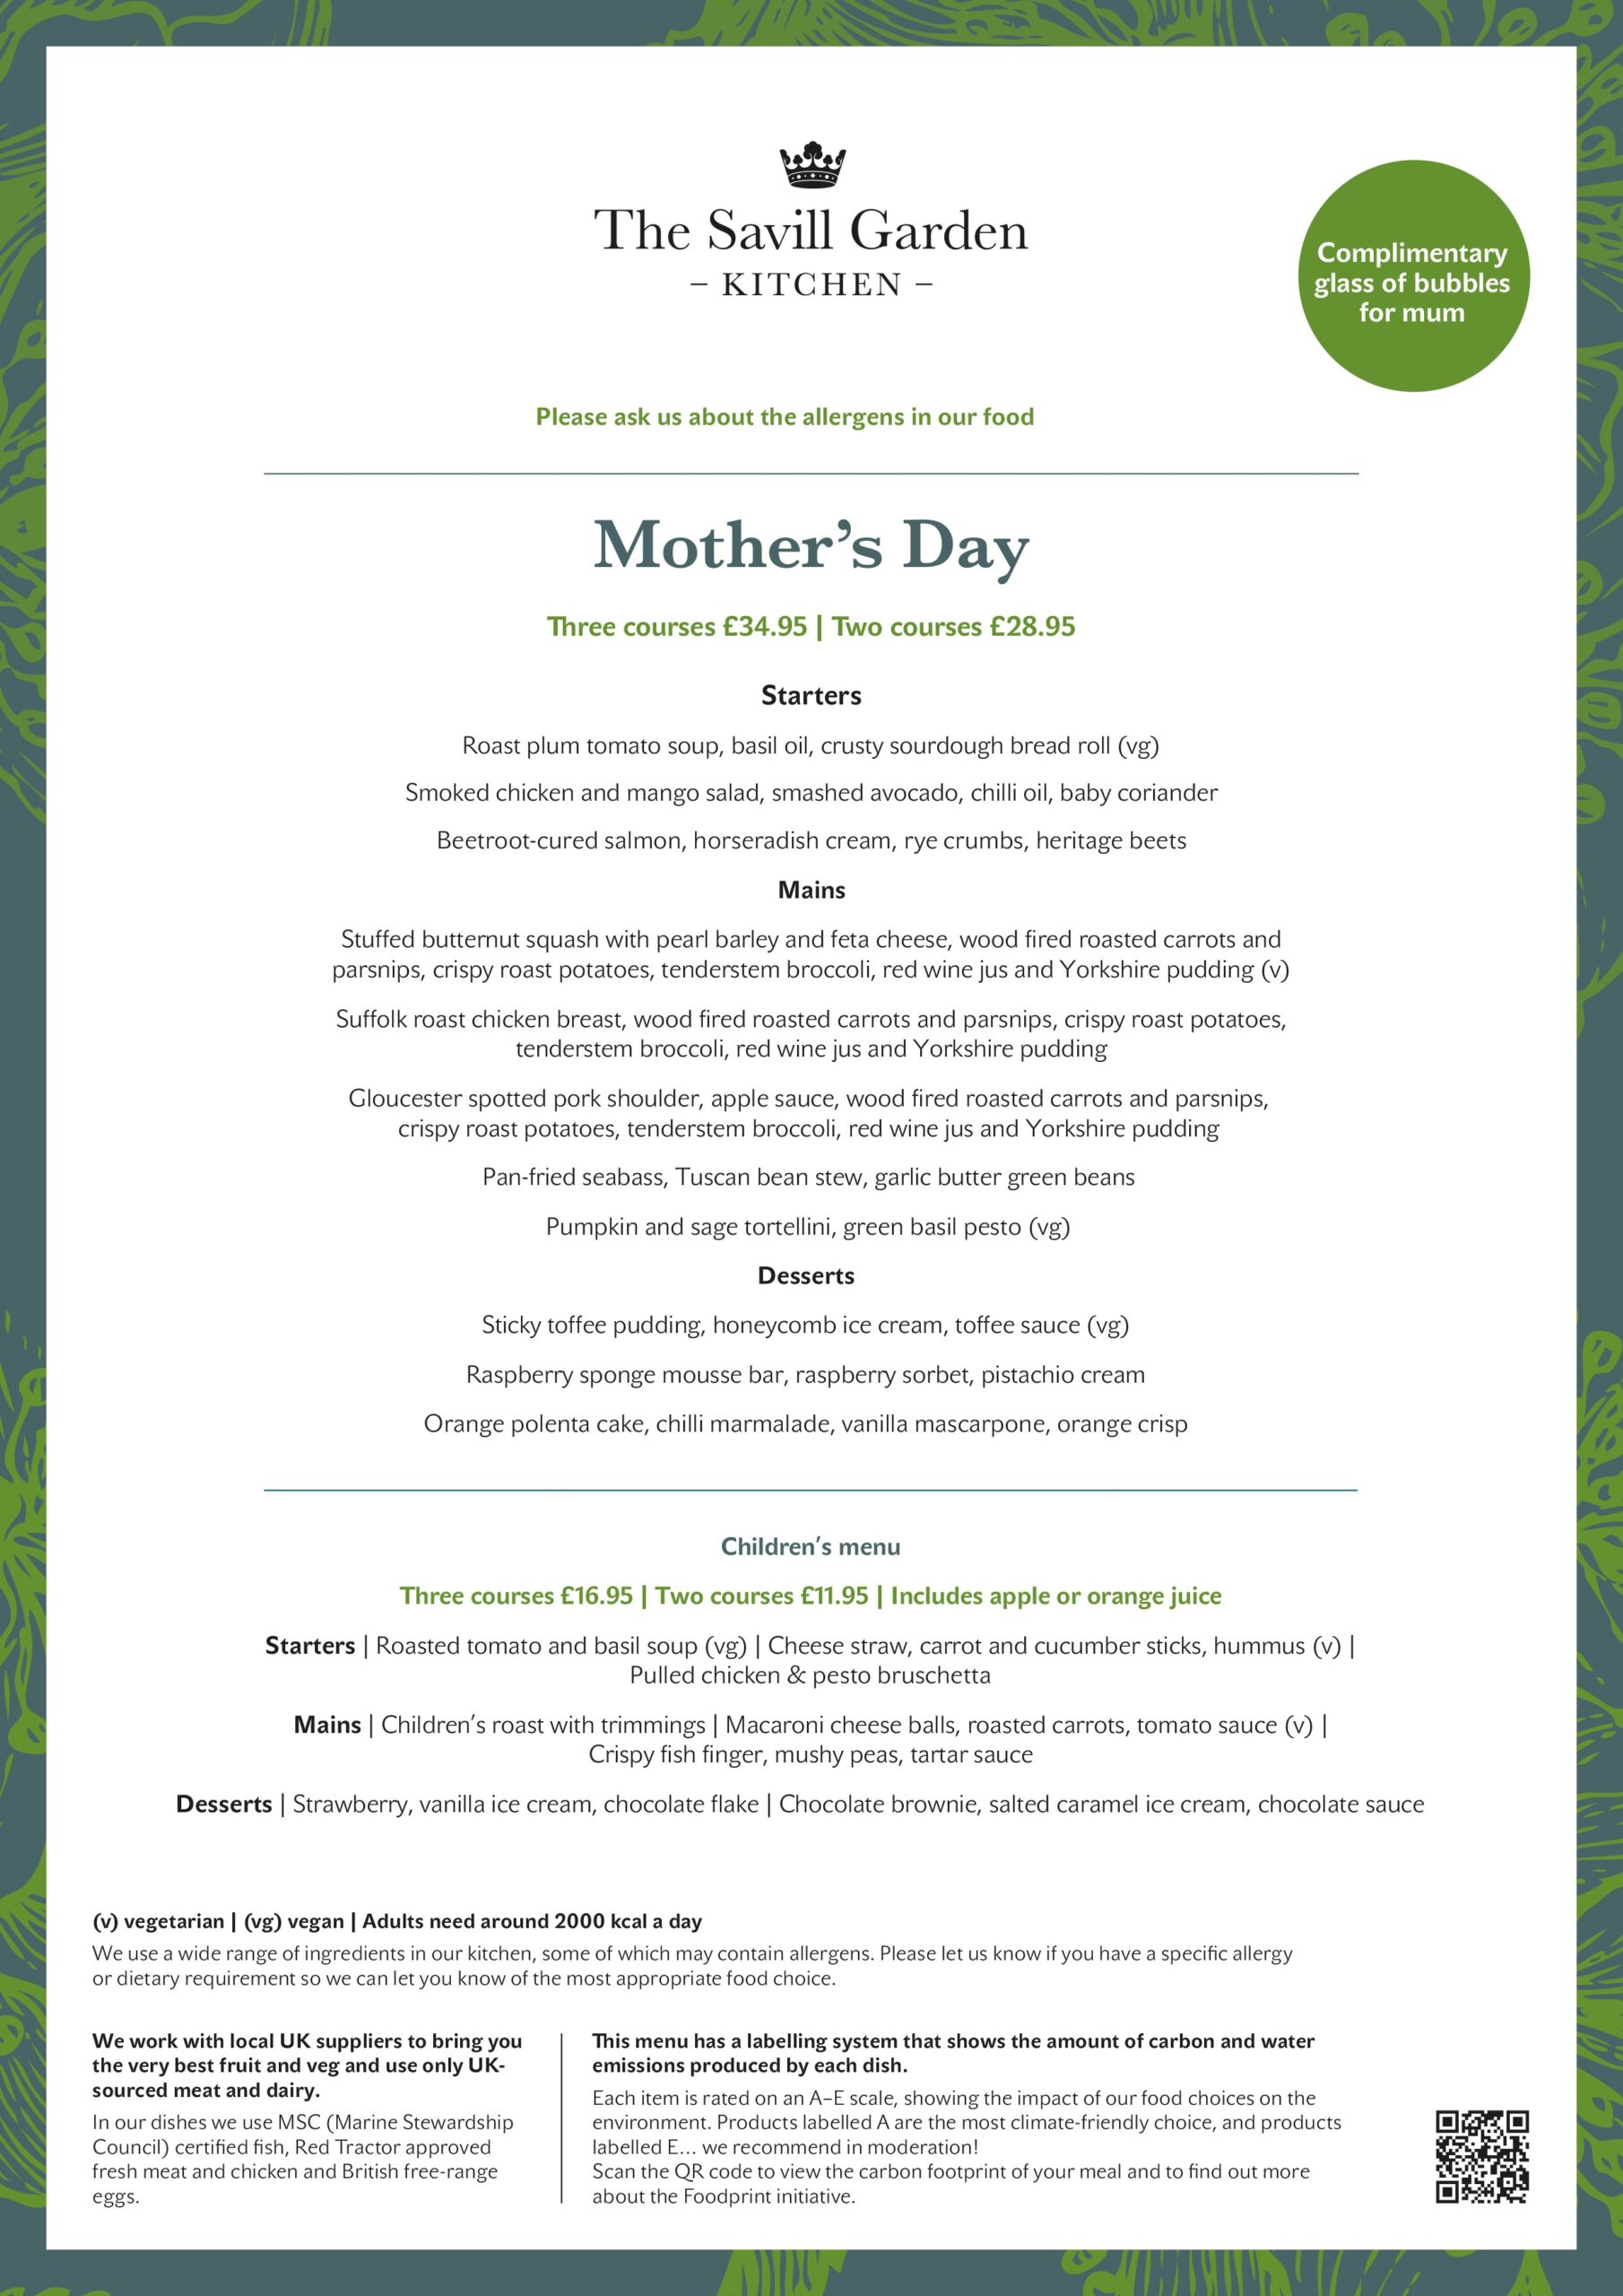 Mother's Day lunch menu.